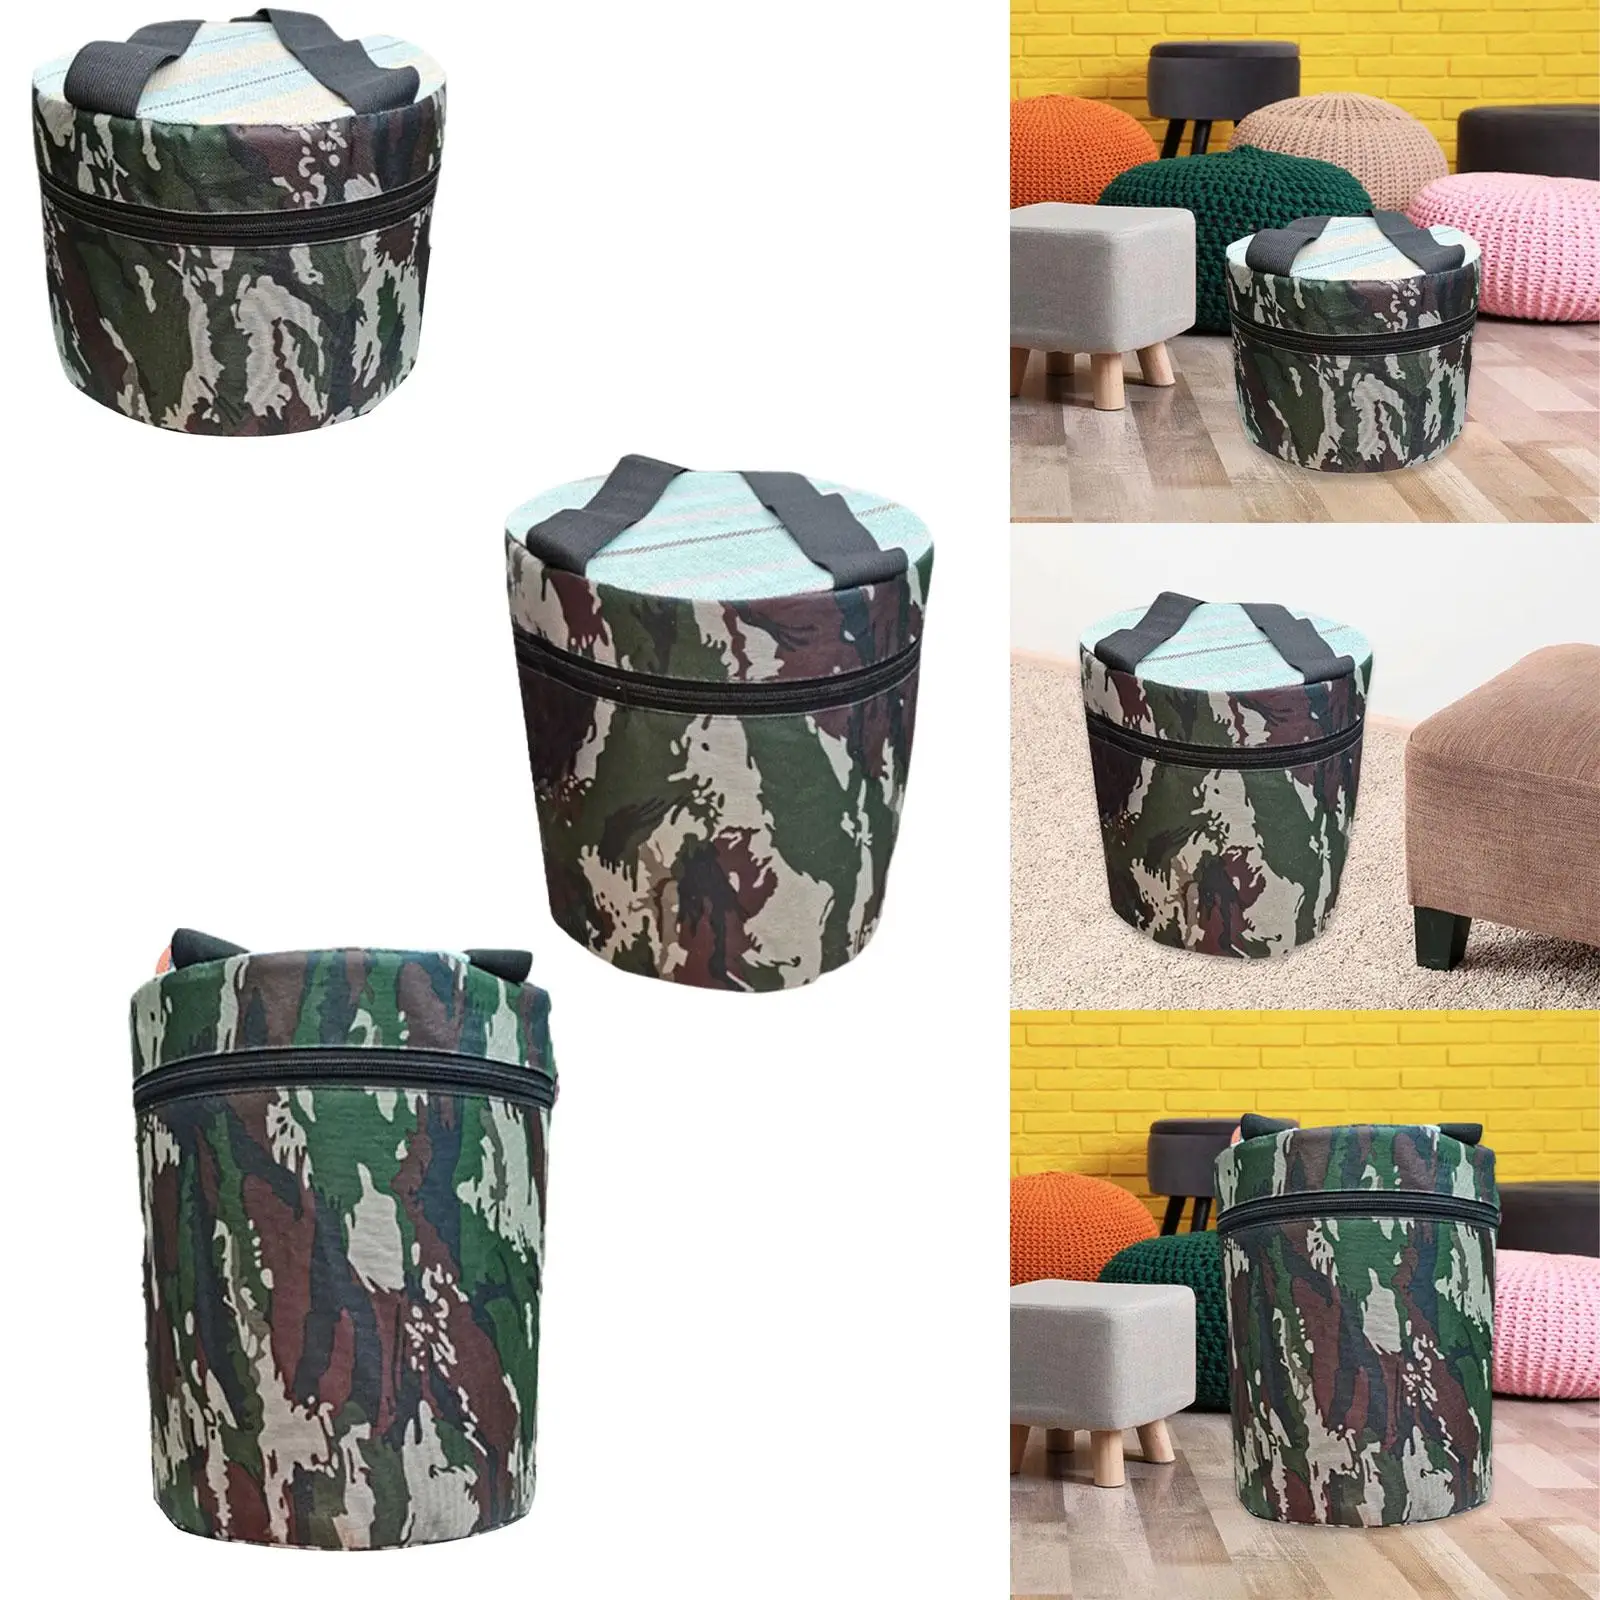 Garden Wearable Stool Foam Gardening Stool, with Strap Outdoor Footstools, Soft Garden Seat Cushion for Planting Camping